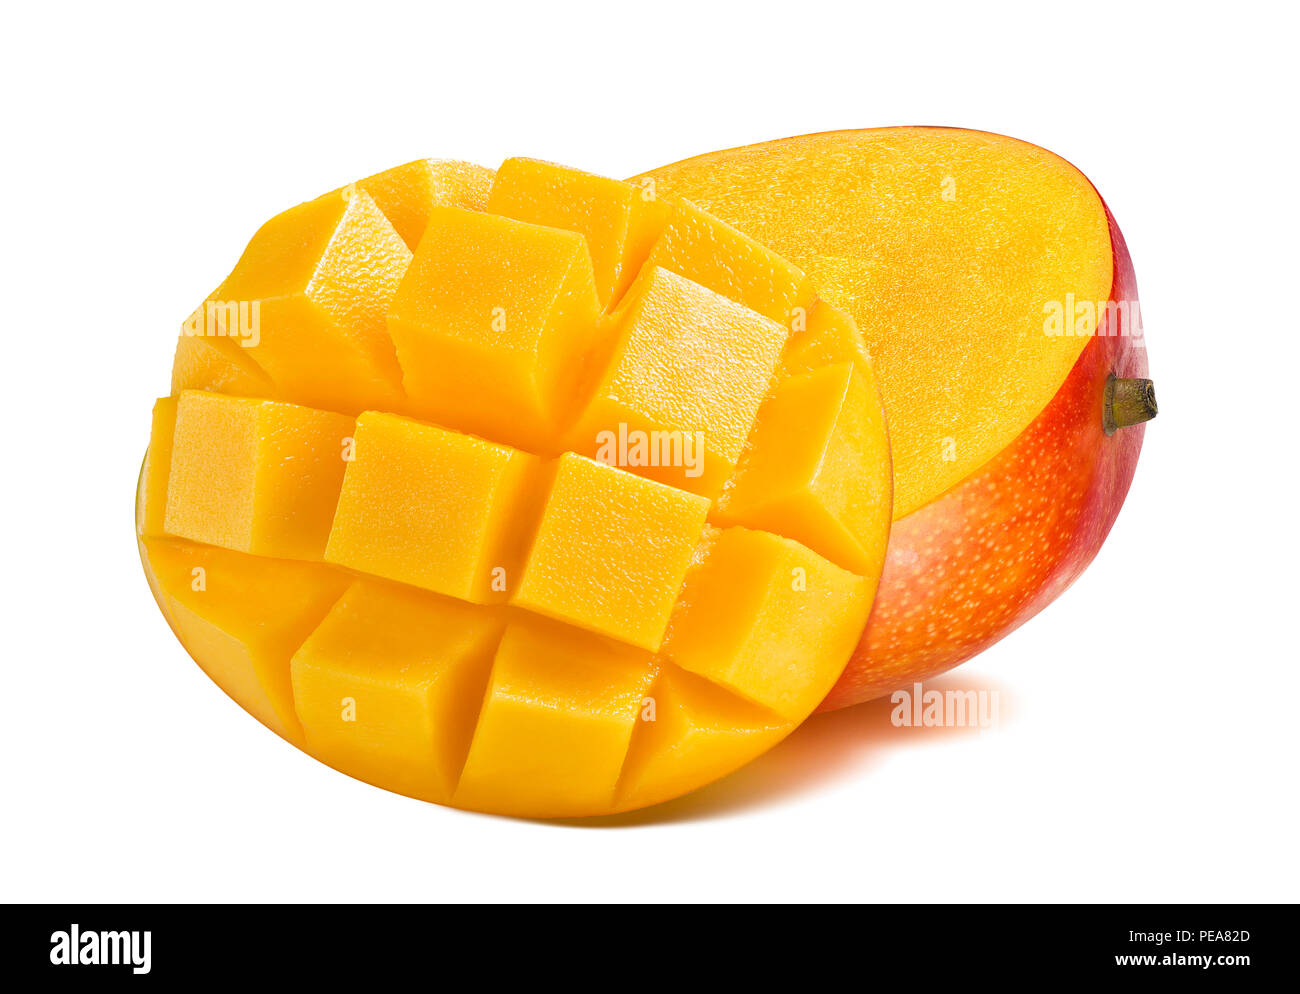 Mango half cut slice diced isolated on white background as package design element Stock Photo